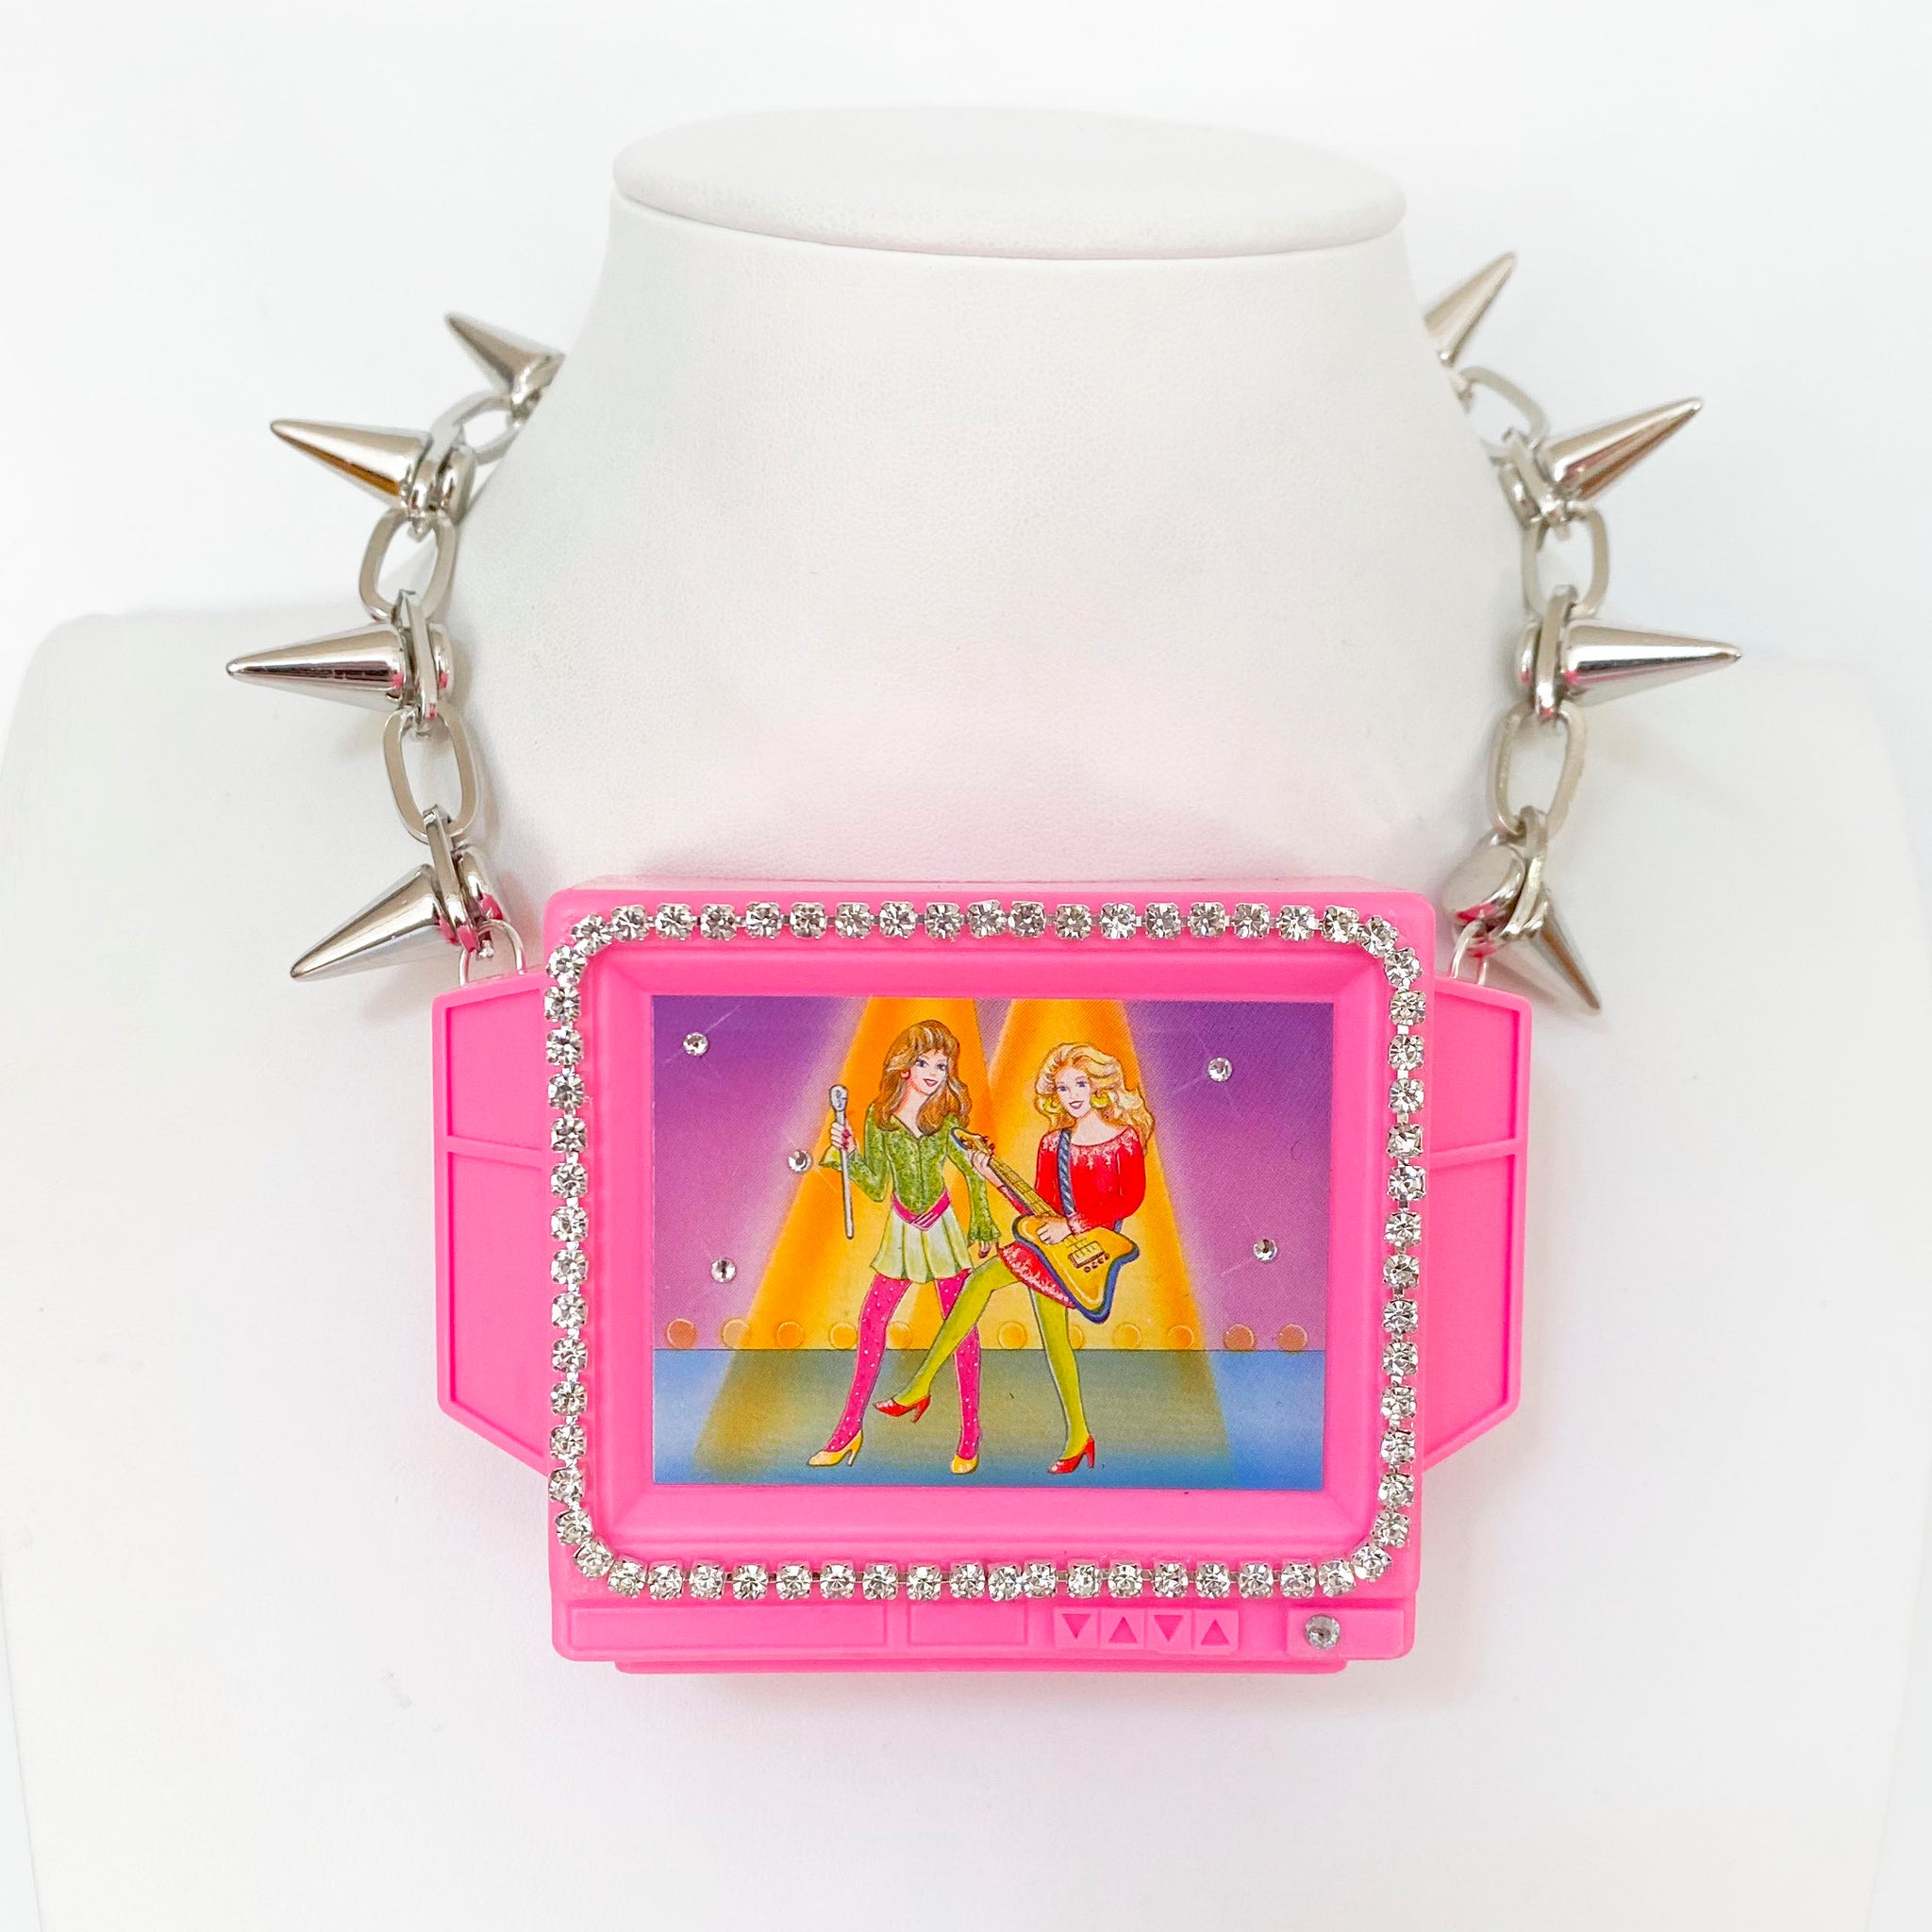 Barbie TV Spiked Necklace